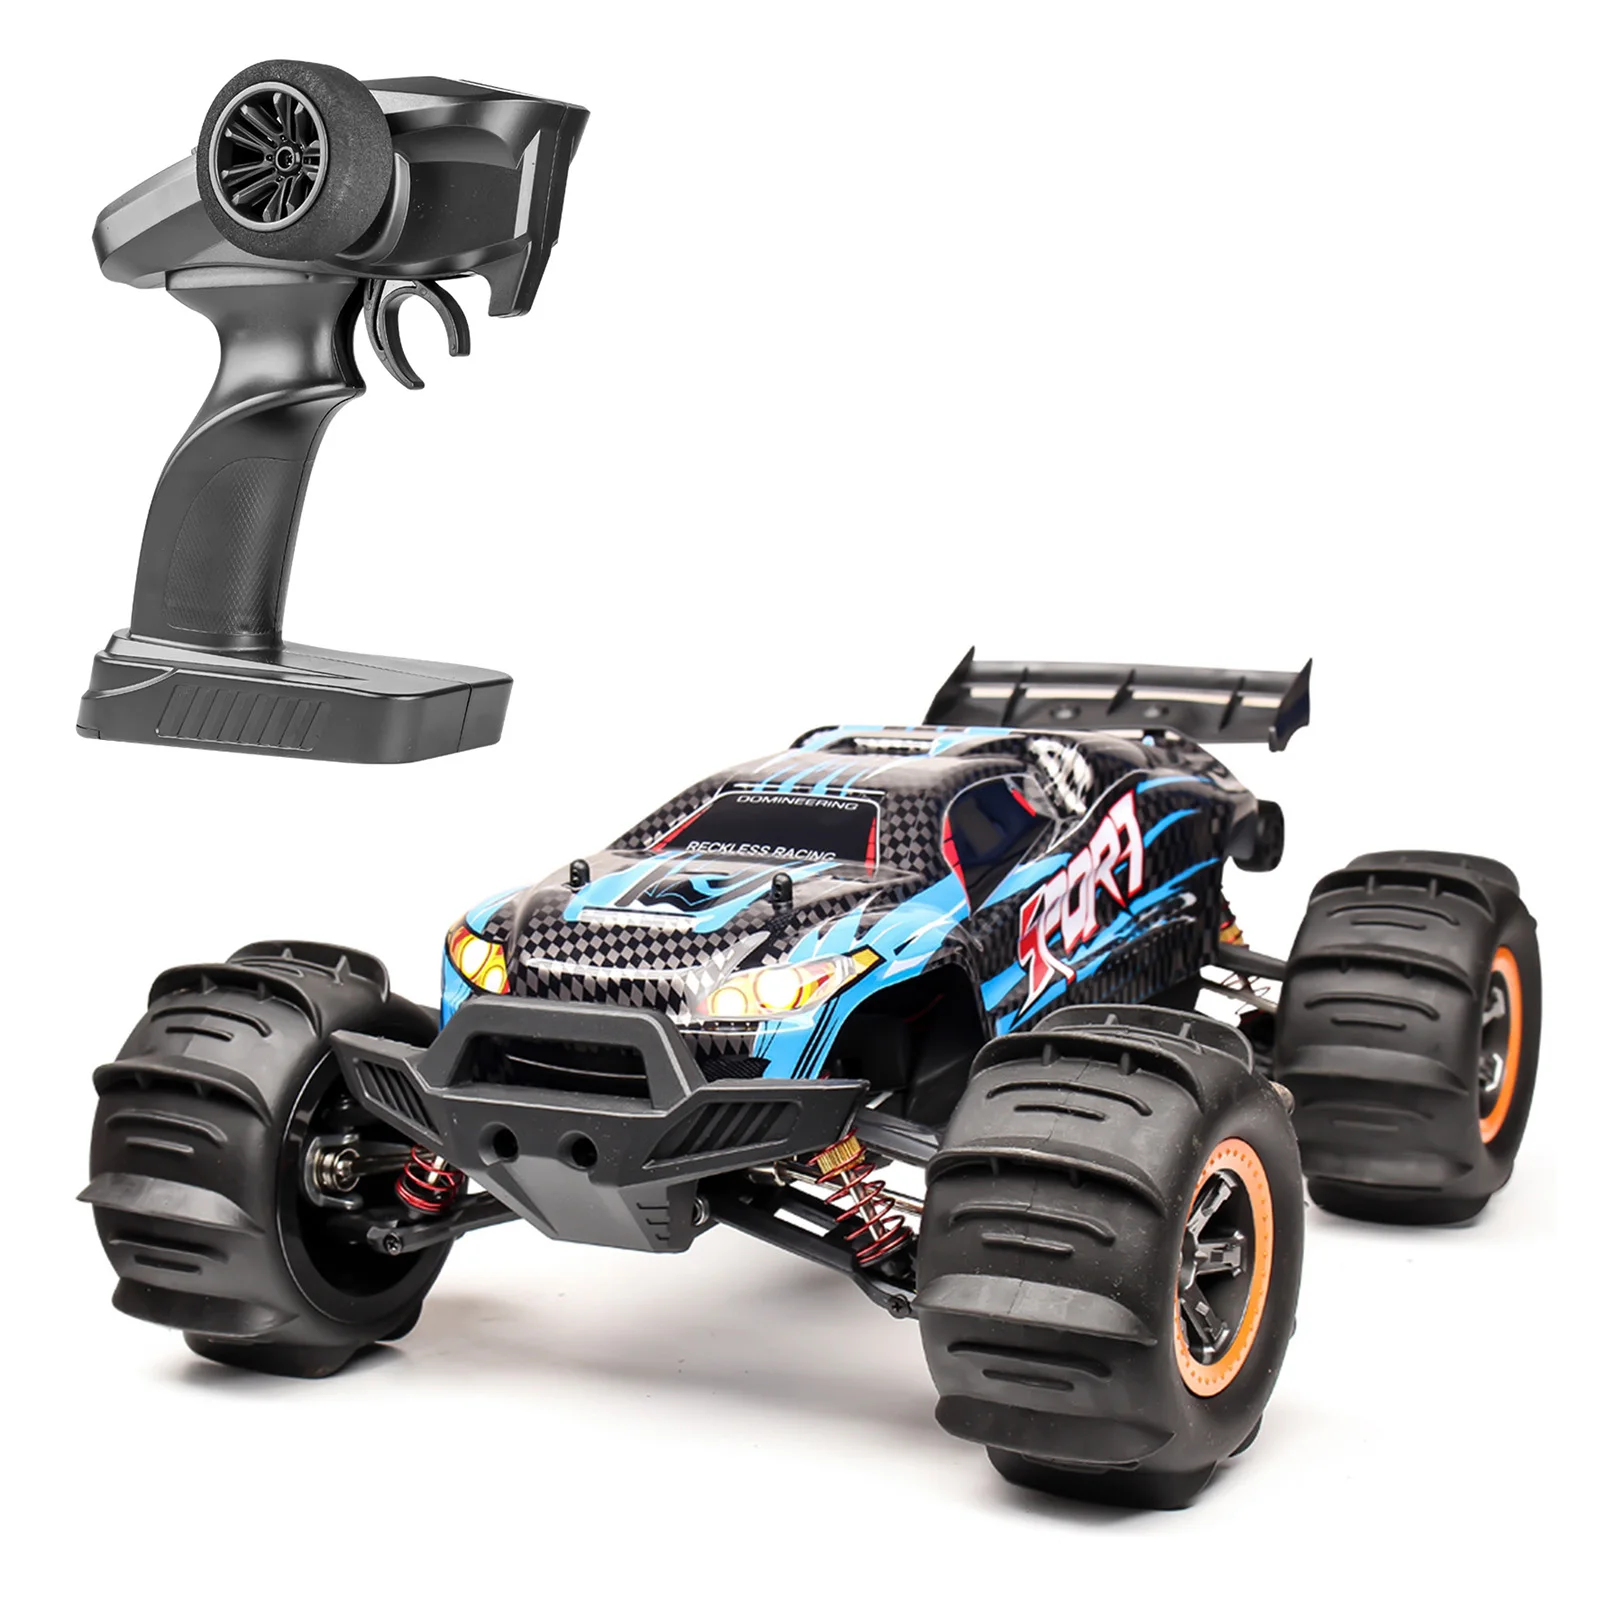 Rc Car 2.4ghz 4wd Off-road Car 1/12 Racing Car 60km/h High Speed Brushless  Motor Working 15min Remote Control Truck Rtr For Kids - Buy Rc Car,Off-road  Car,Remote Control Truck Product on Alibaba.com